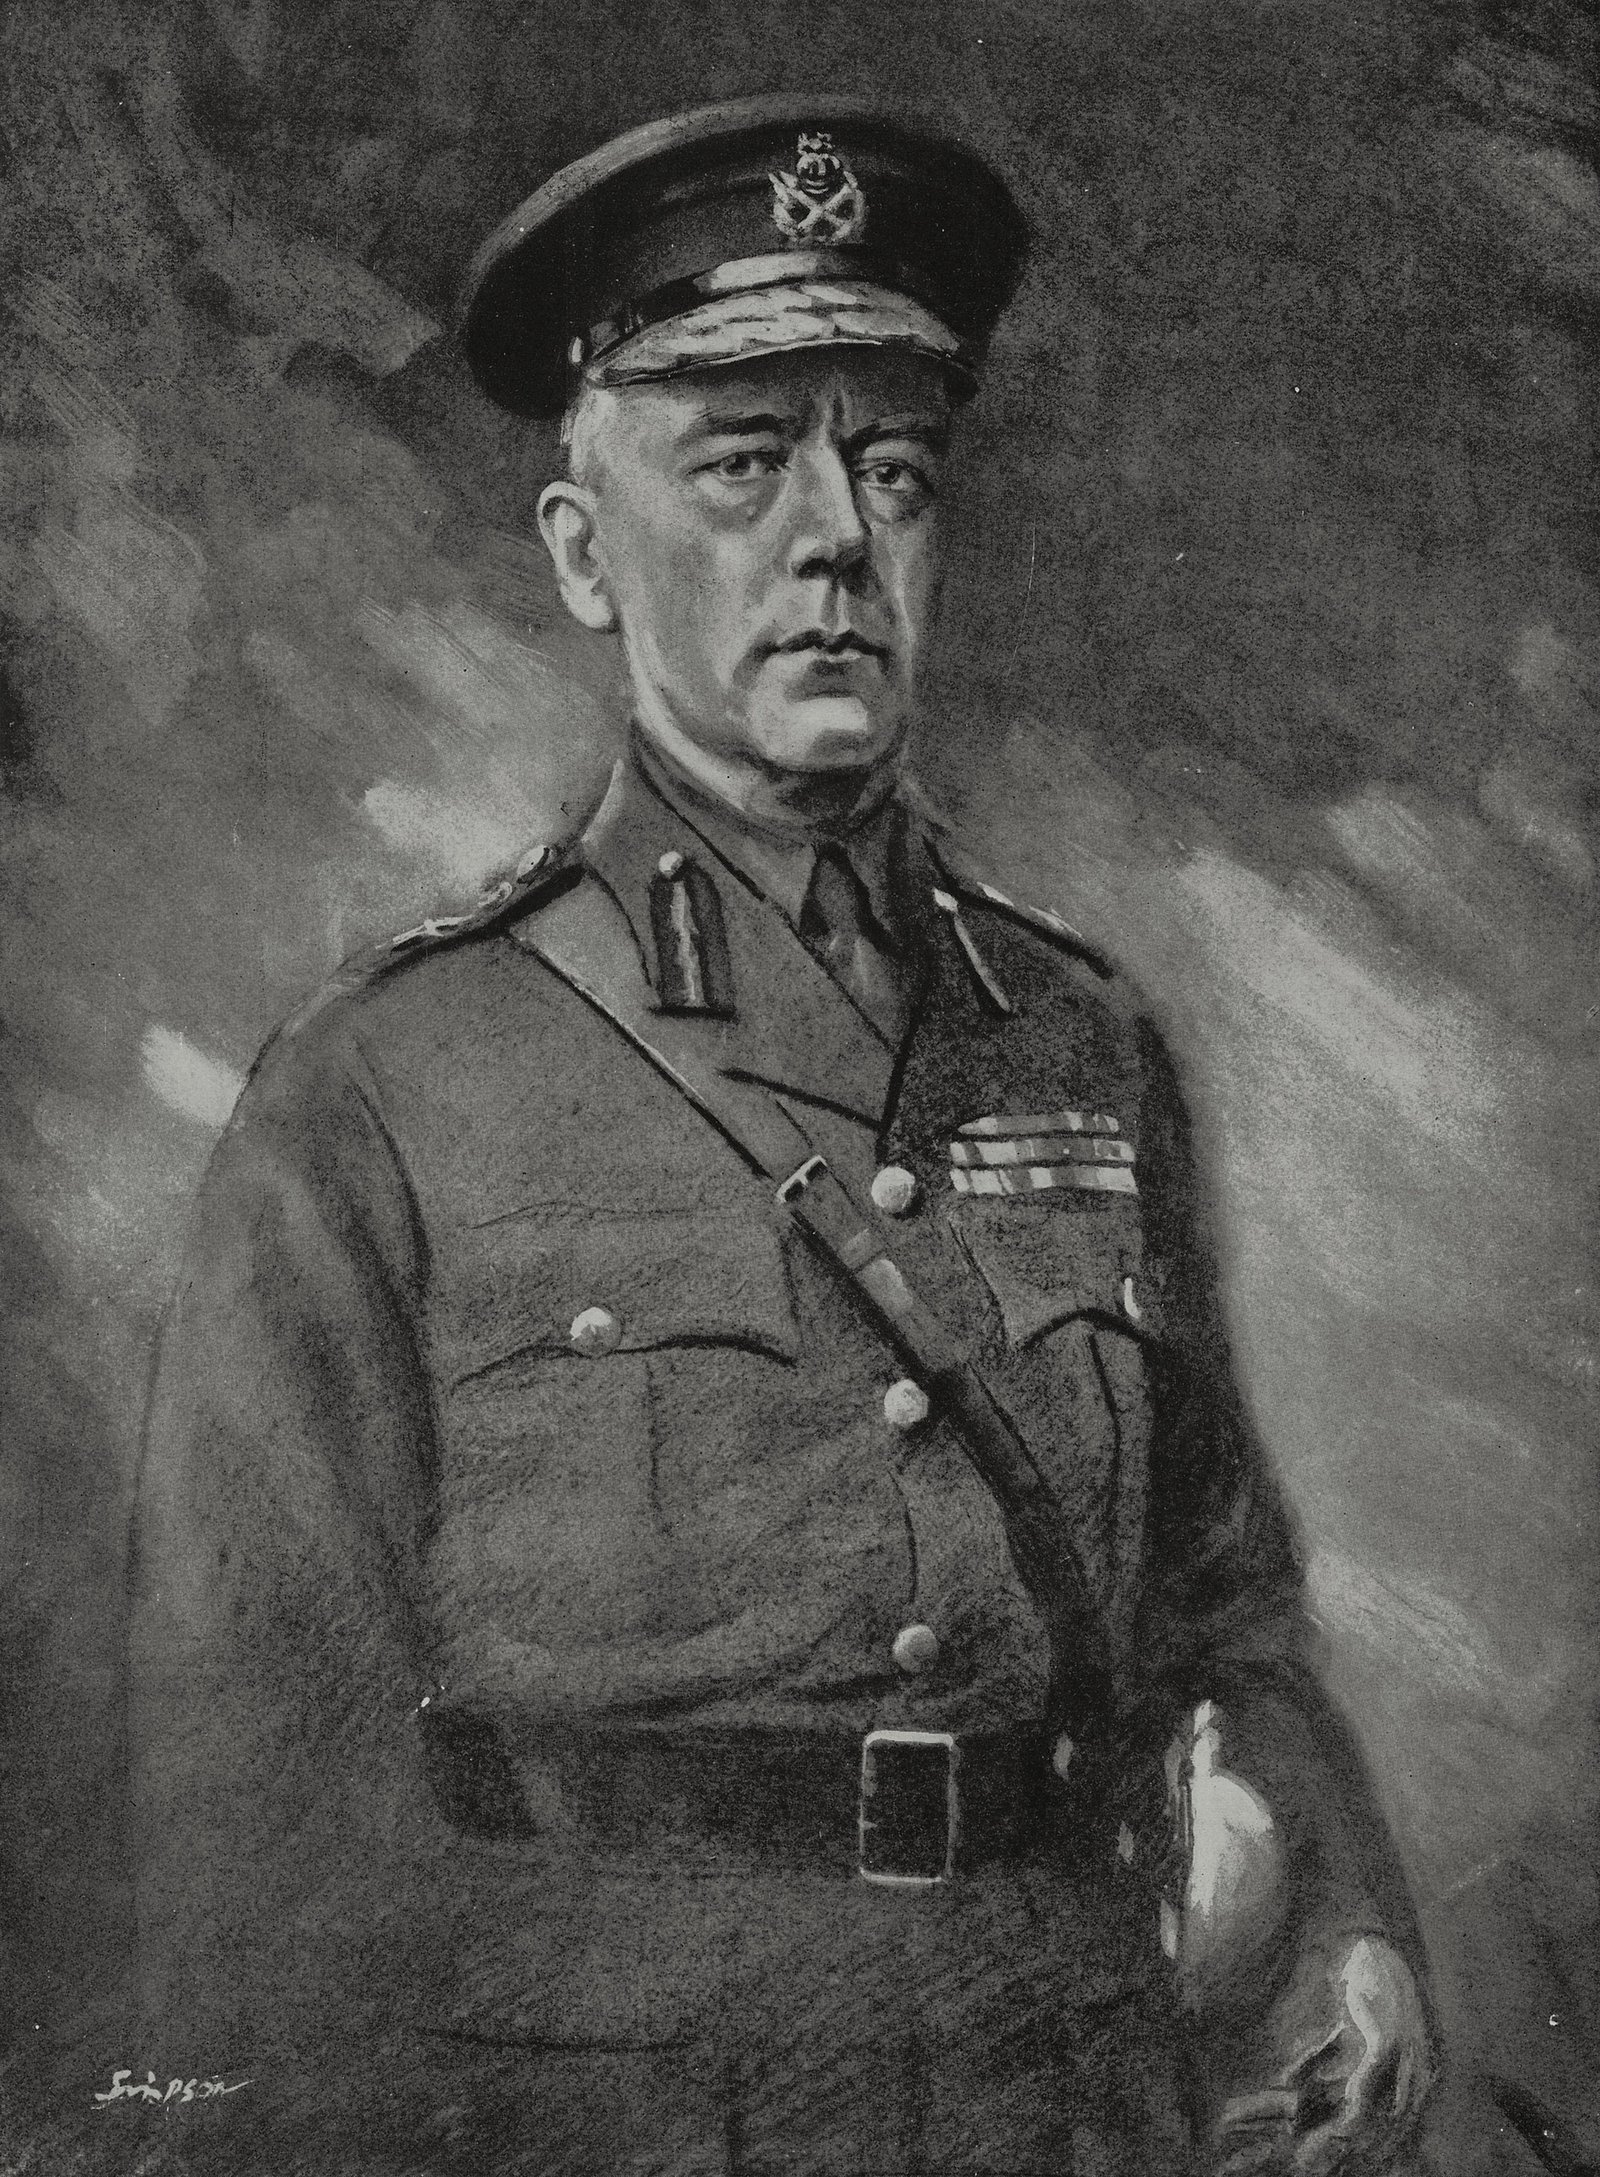 Image - British General Nevil Macready, seen here in a drawing by Joseph Simpson from The Illustrated London News in 1920, did not trust Collins's behaviour in the Civil War Image: Getty Images/ DEA / ICAS94